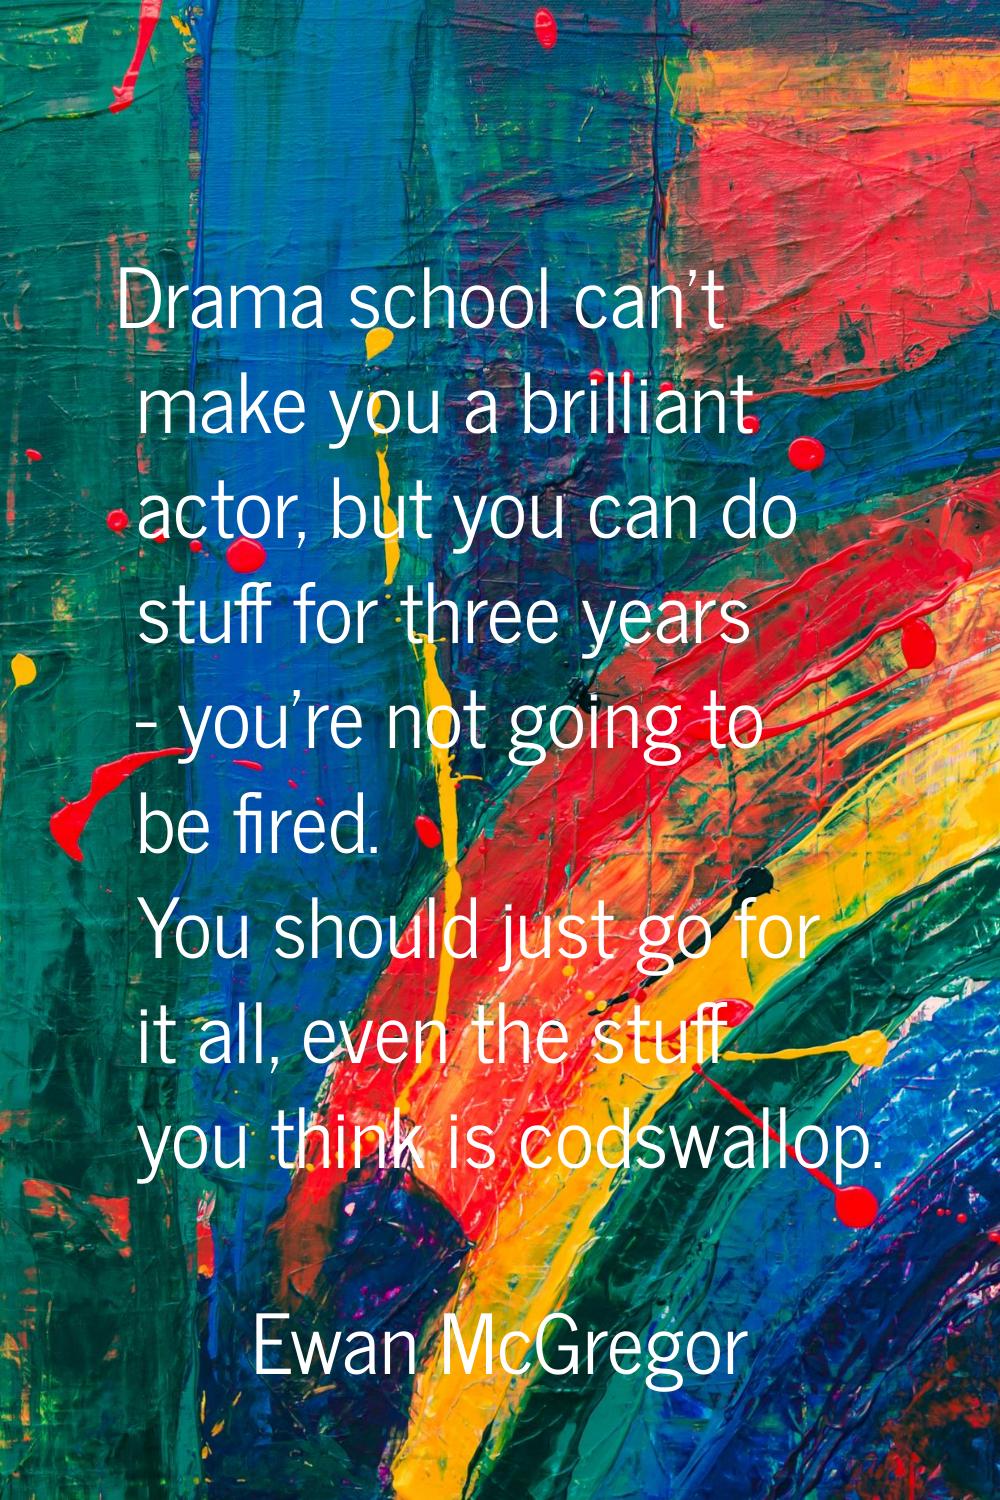 Drama school can't make you a brilliant actor, but you can do stuff for three years - you're not go